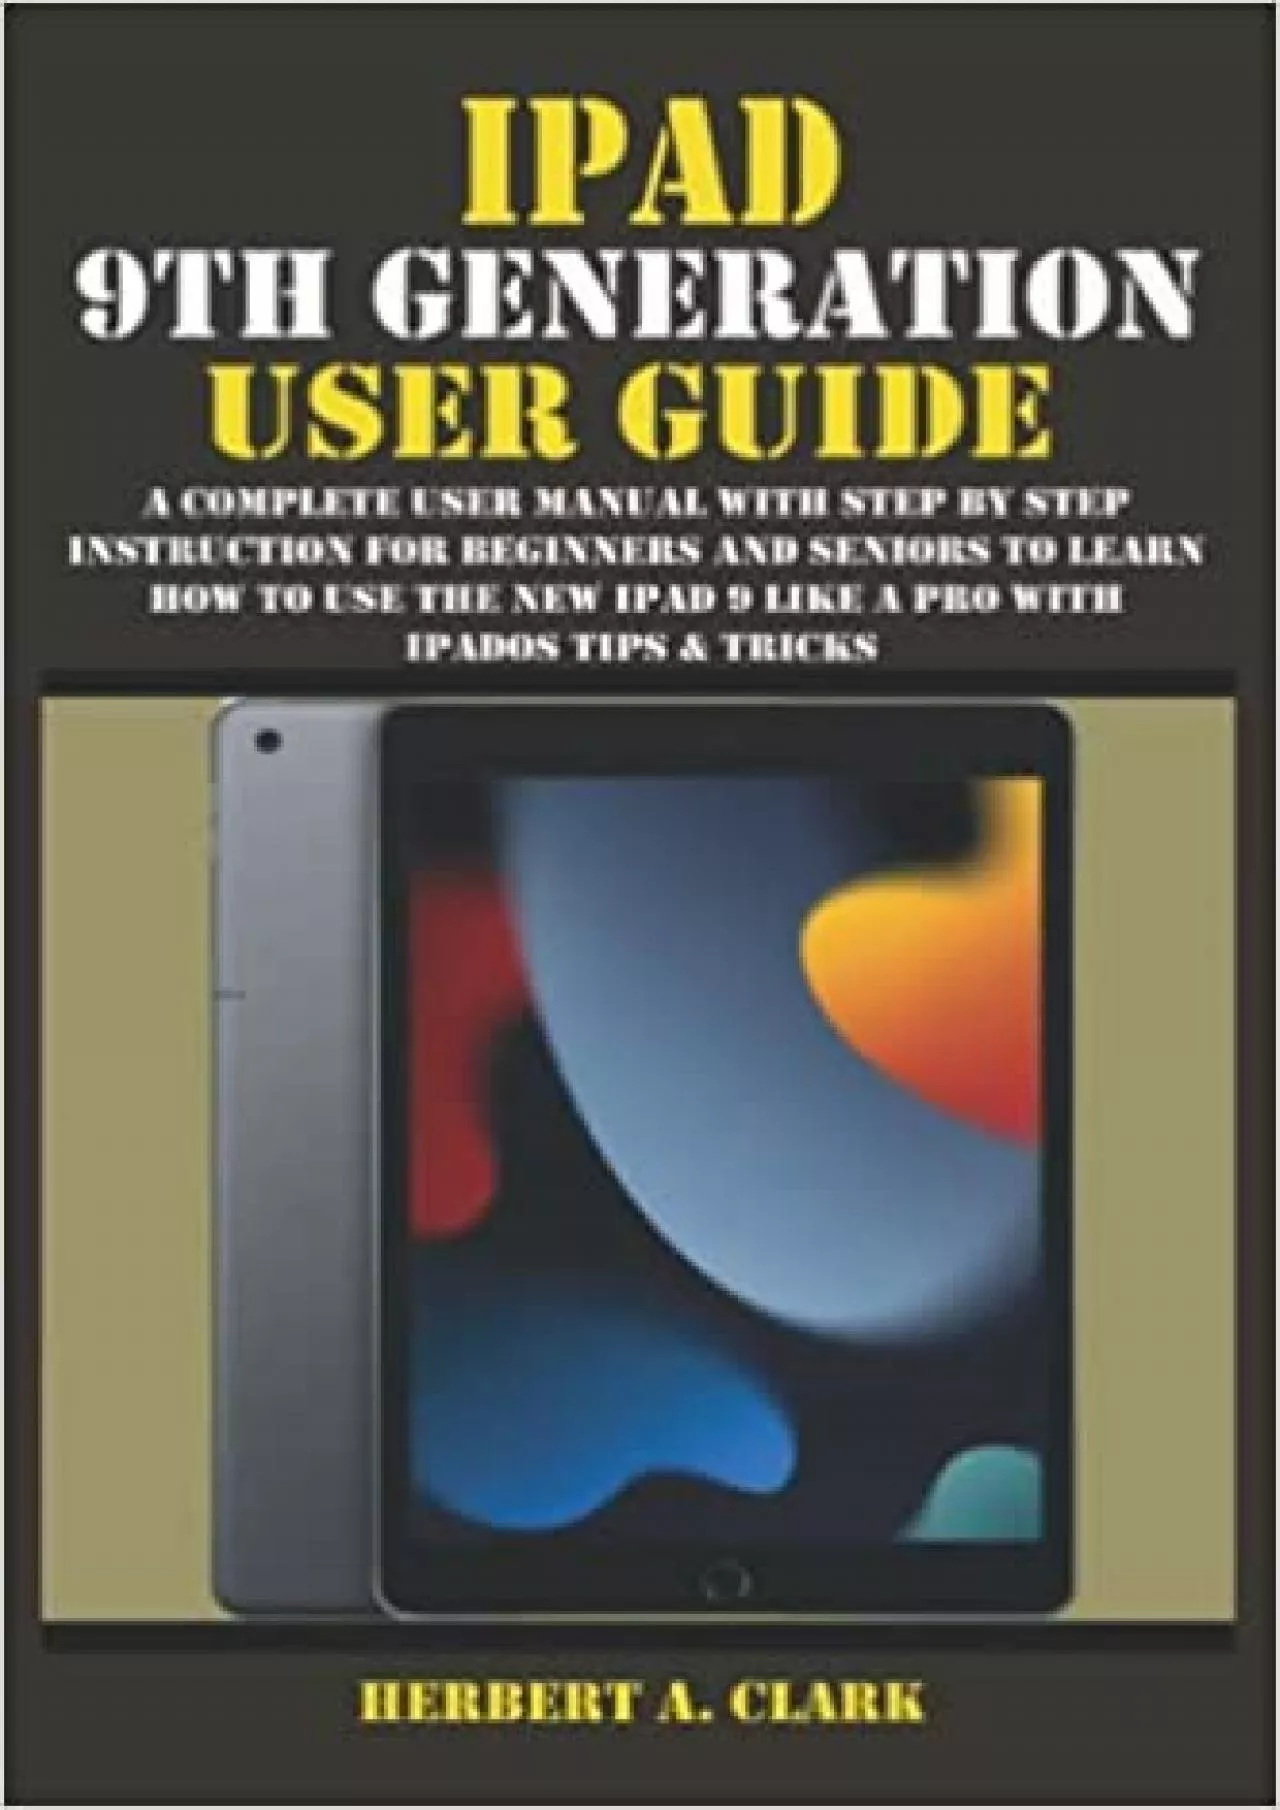 (BOOK)-IPAD 9TH GENERATION USER GUIDE A Complete User Manual with Step By Step Instruction